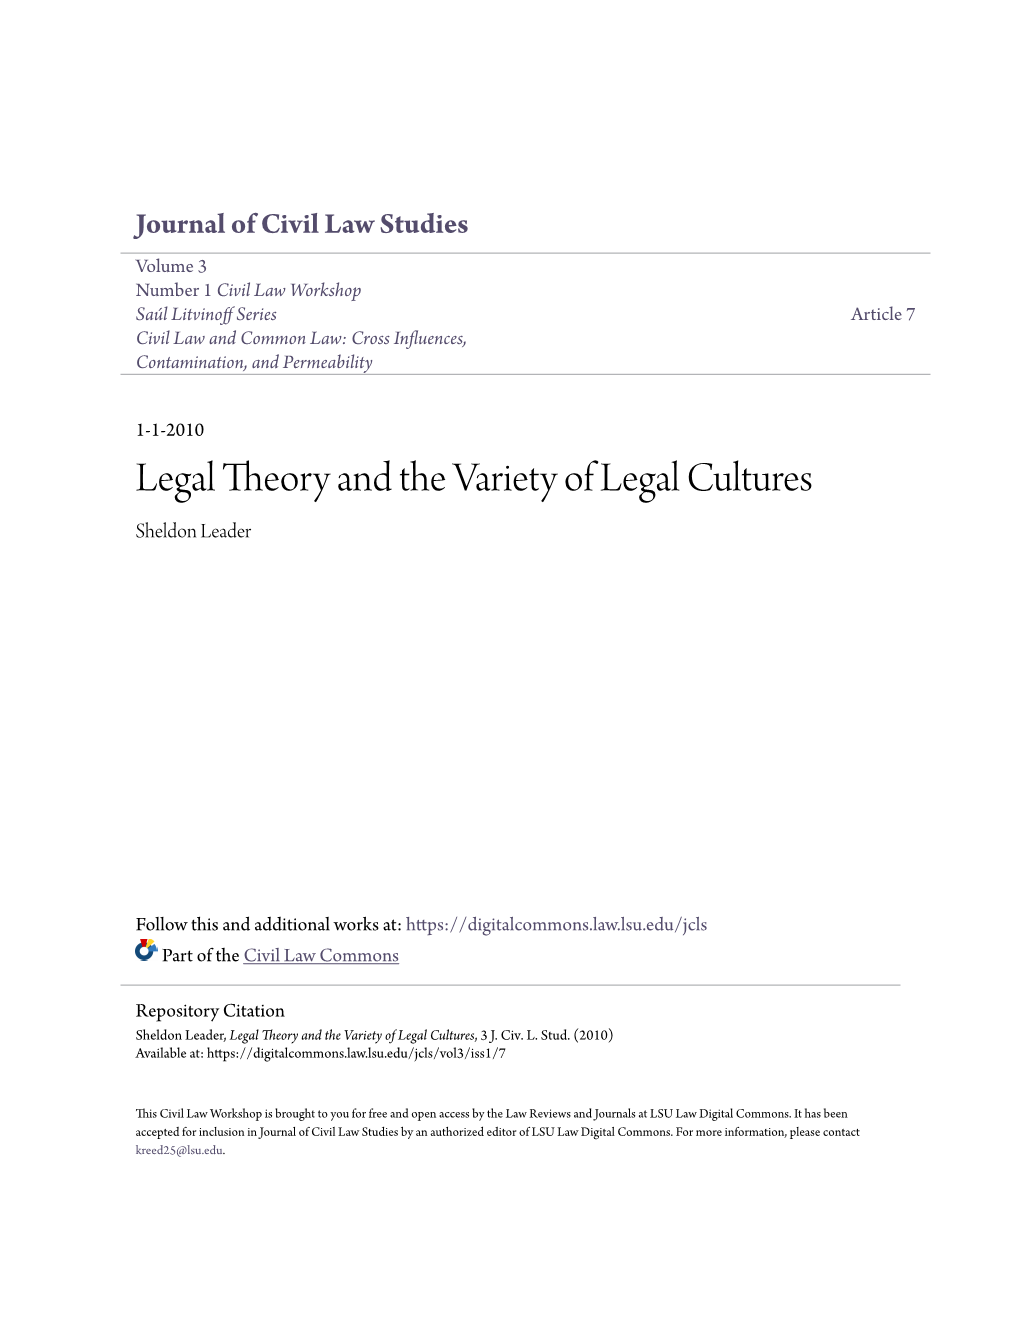 Legal Theory and the Variety of Legal Cultures Sheldon Leader